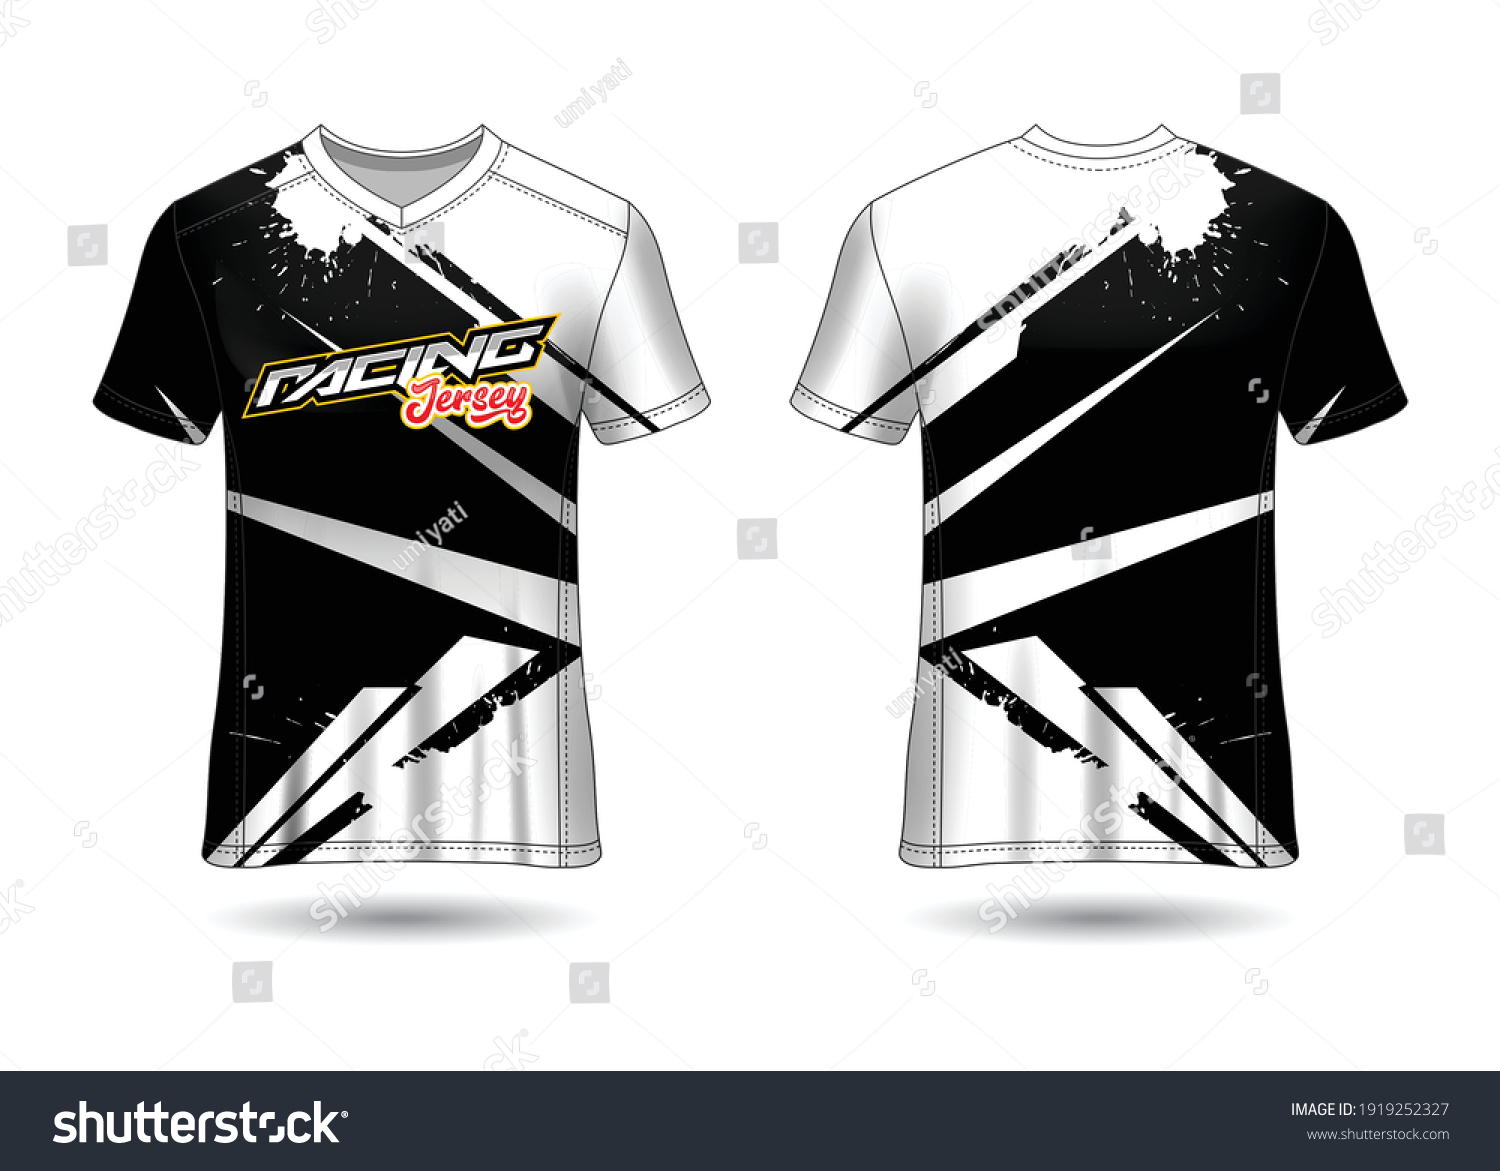 Sports Racing Jersey Design Template Team Stock Vector (Royalty Free ...